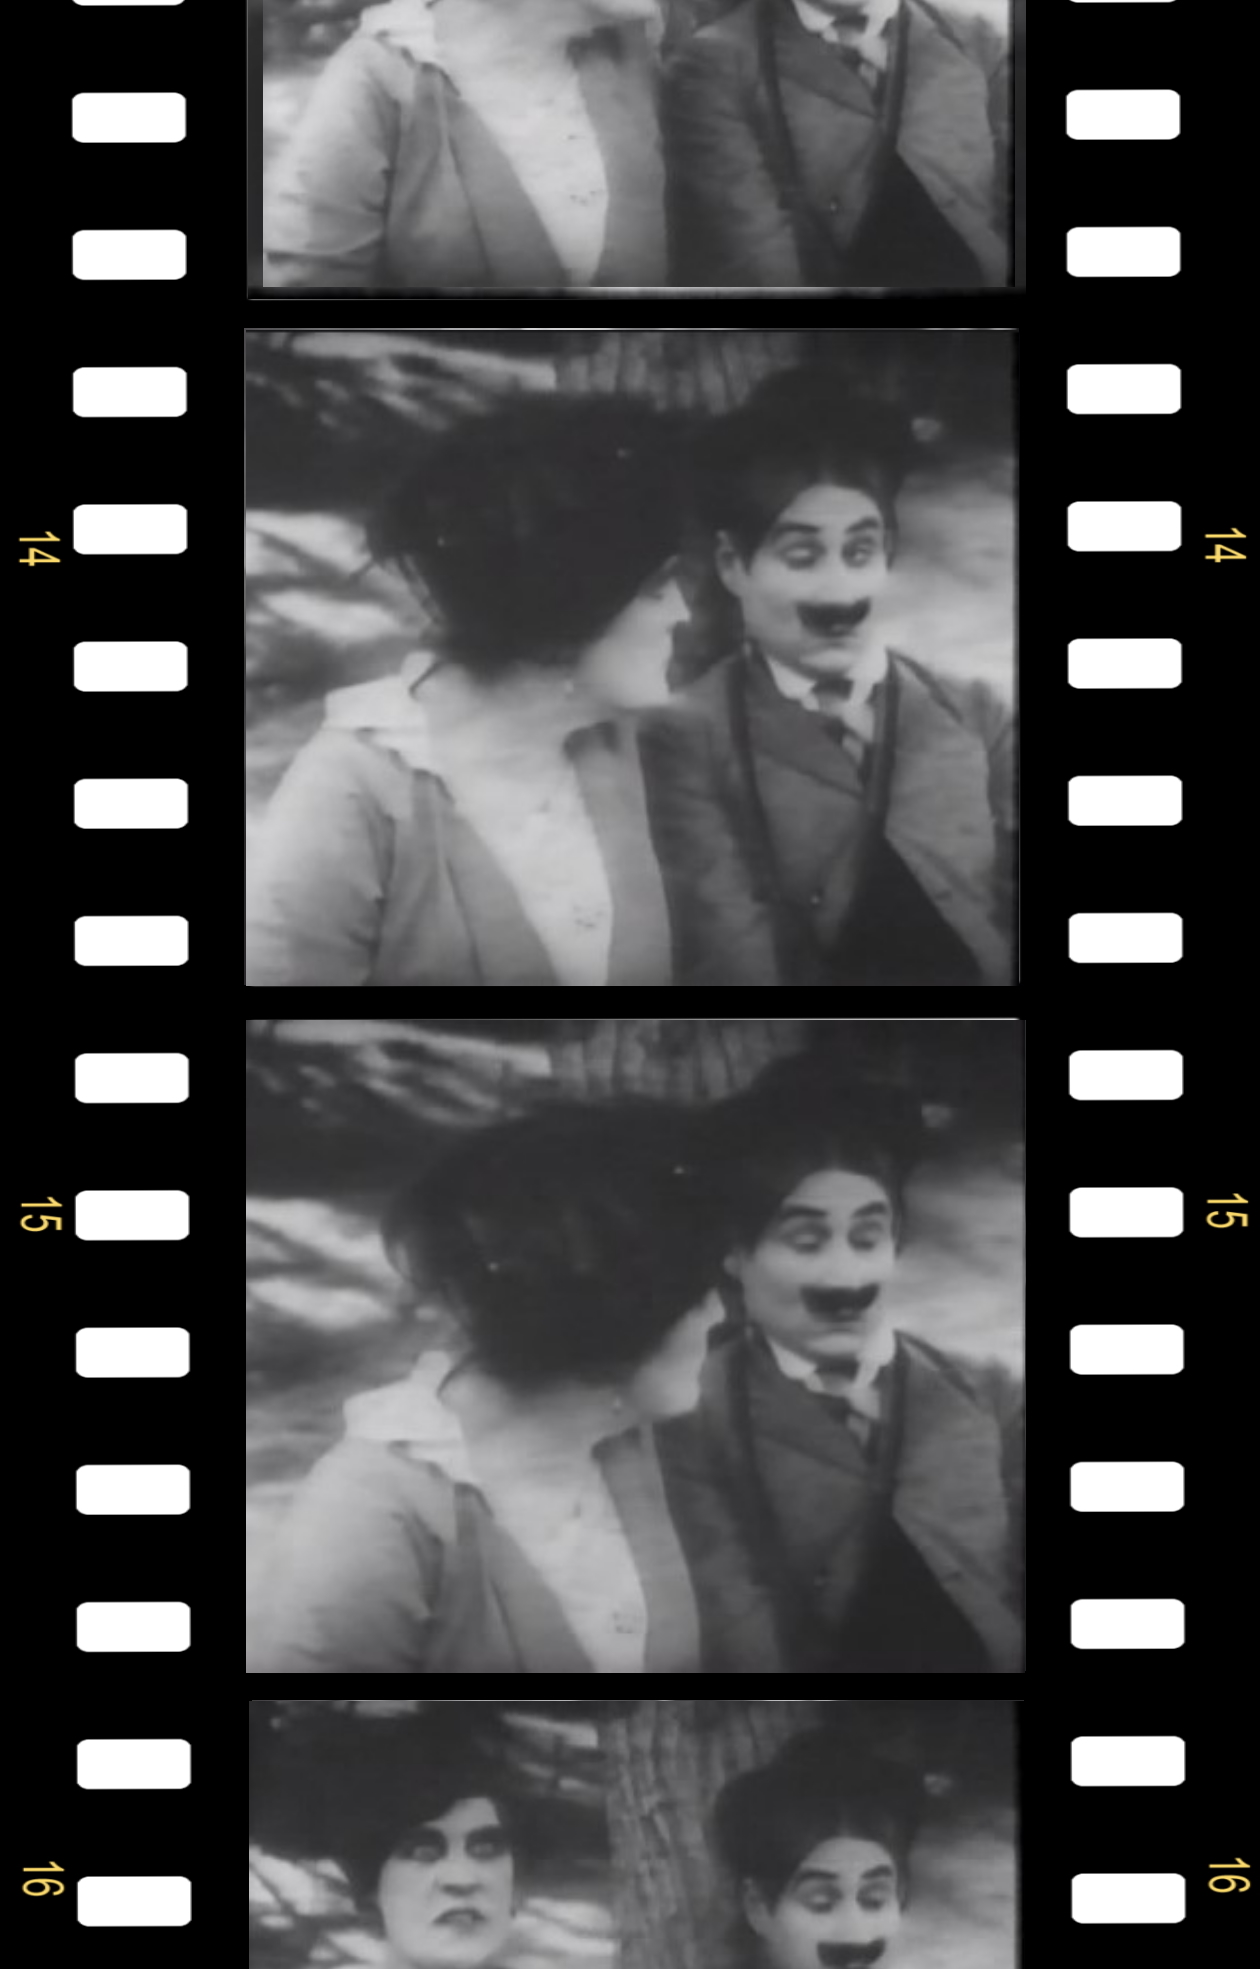 Gussle's Day of Rest filmstrip